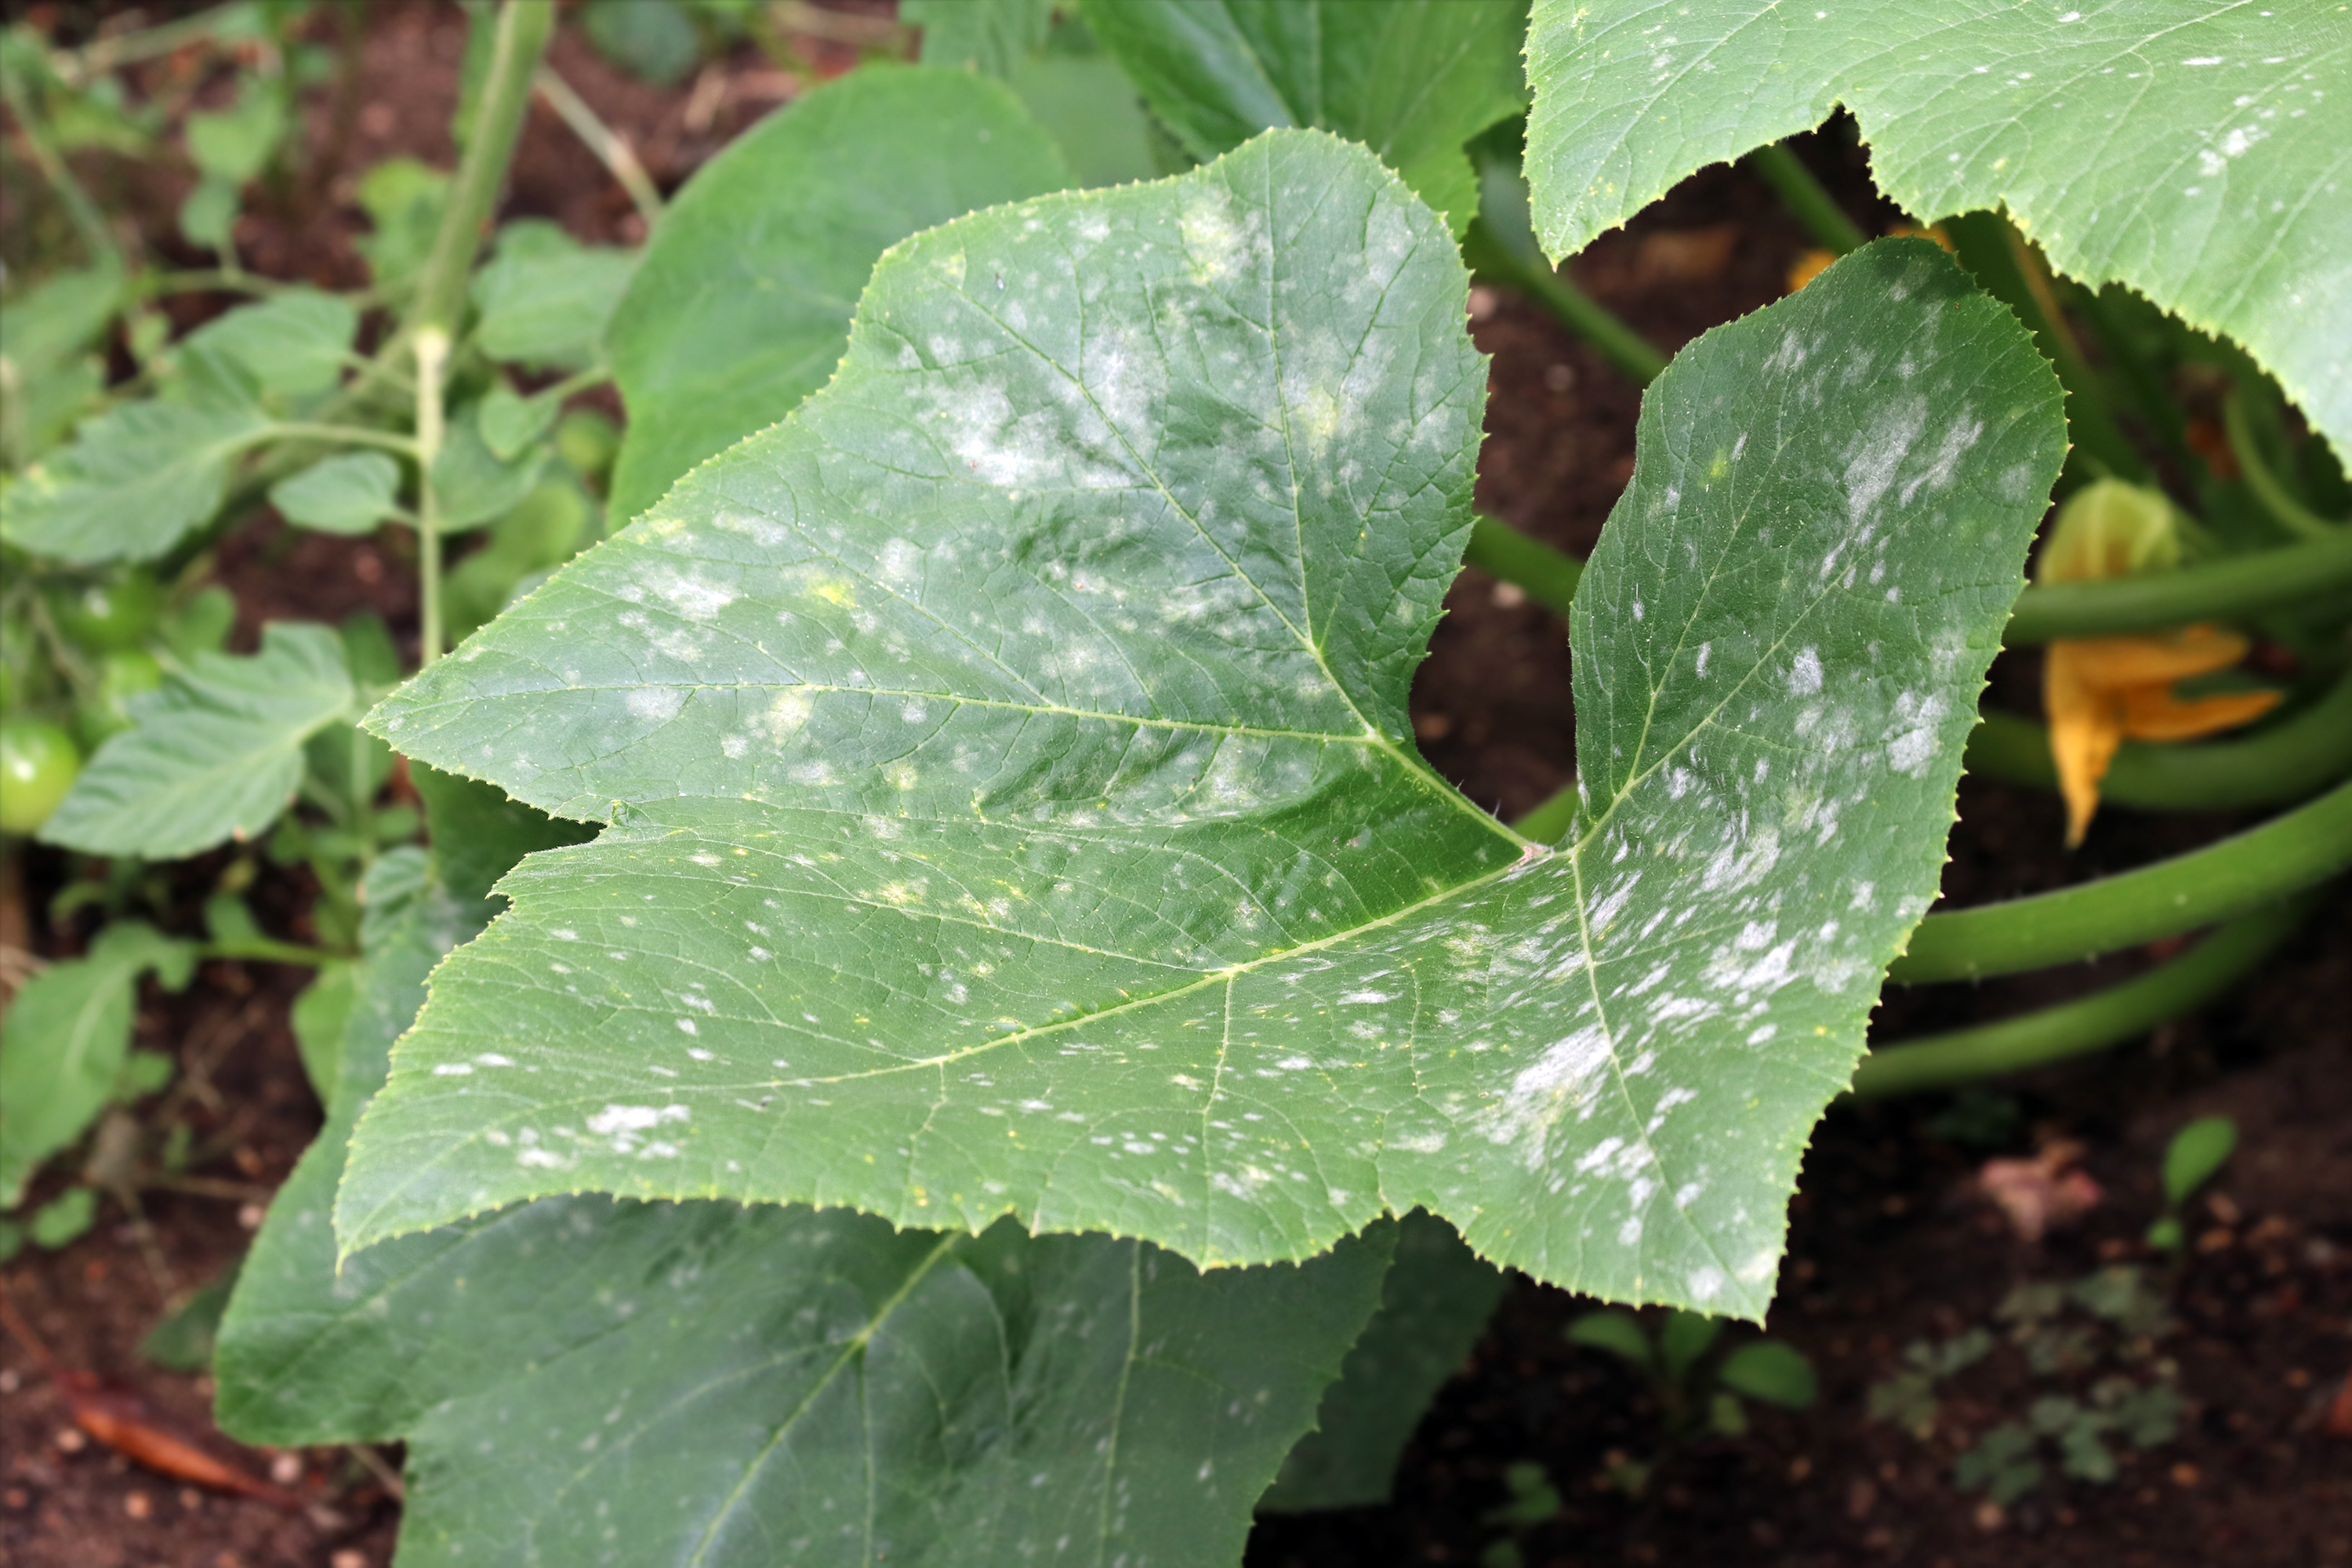 A zucchini plant with powdery mildew on the leaves